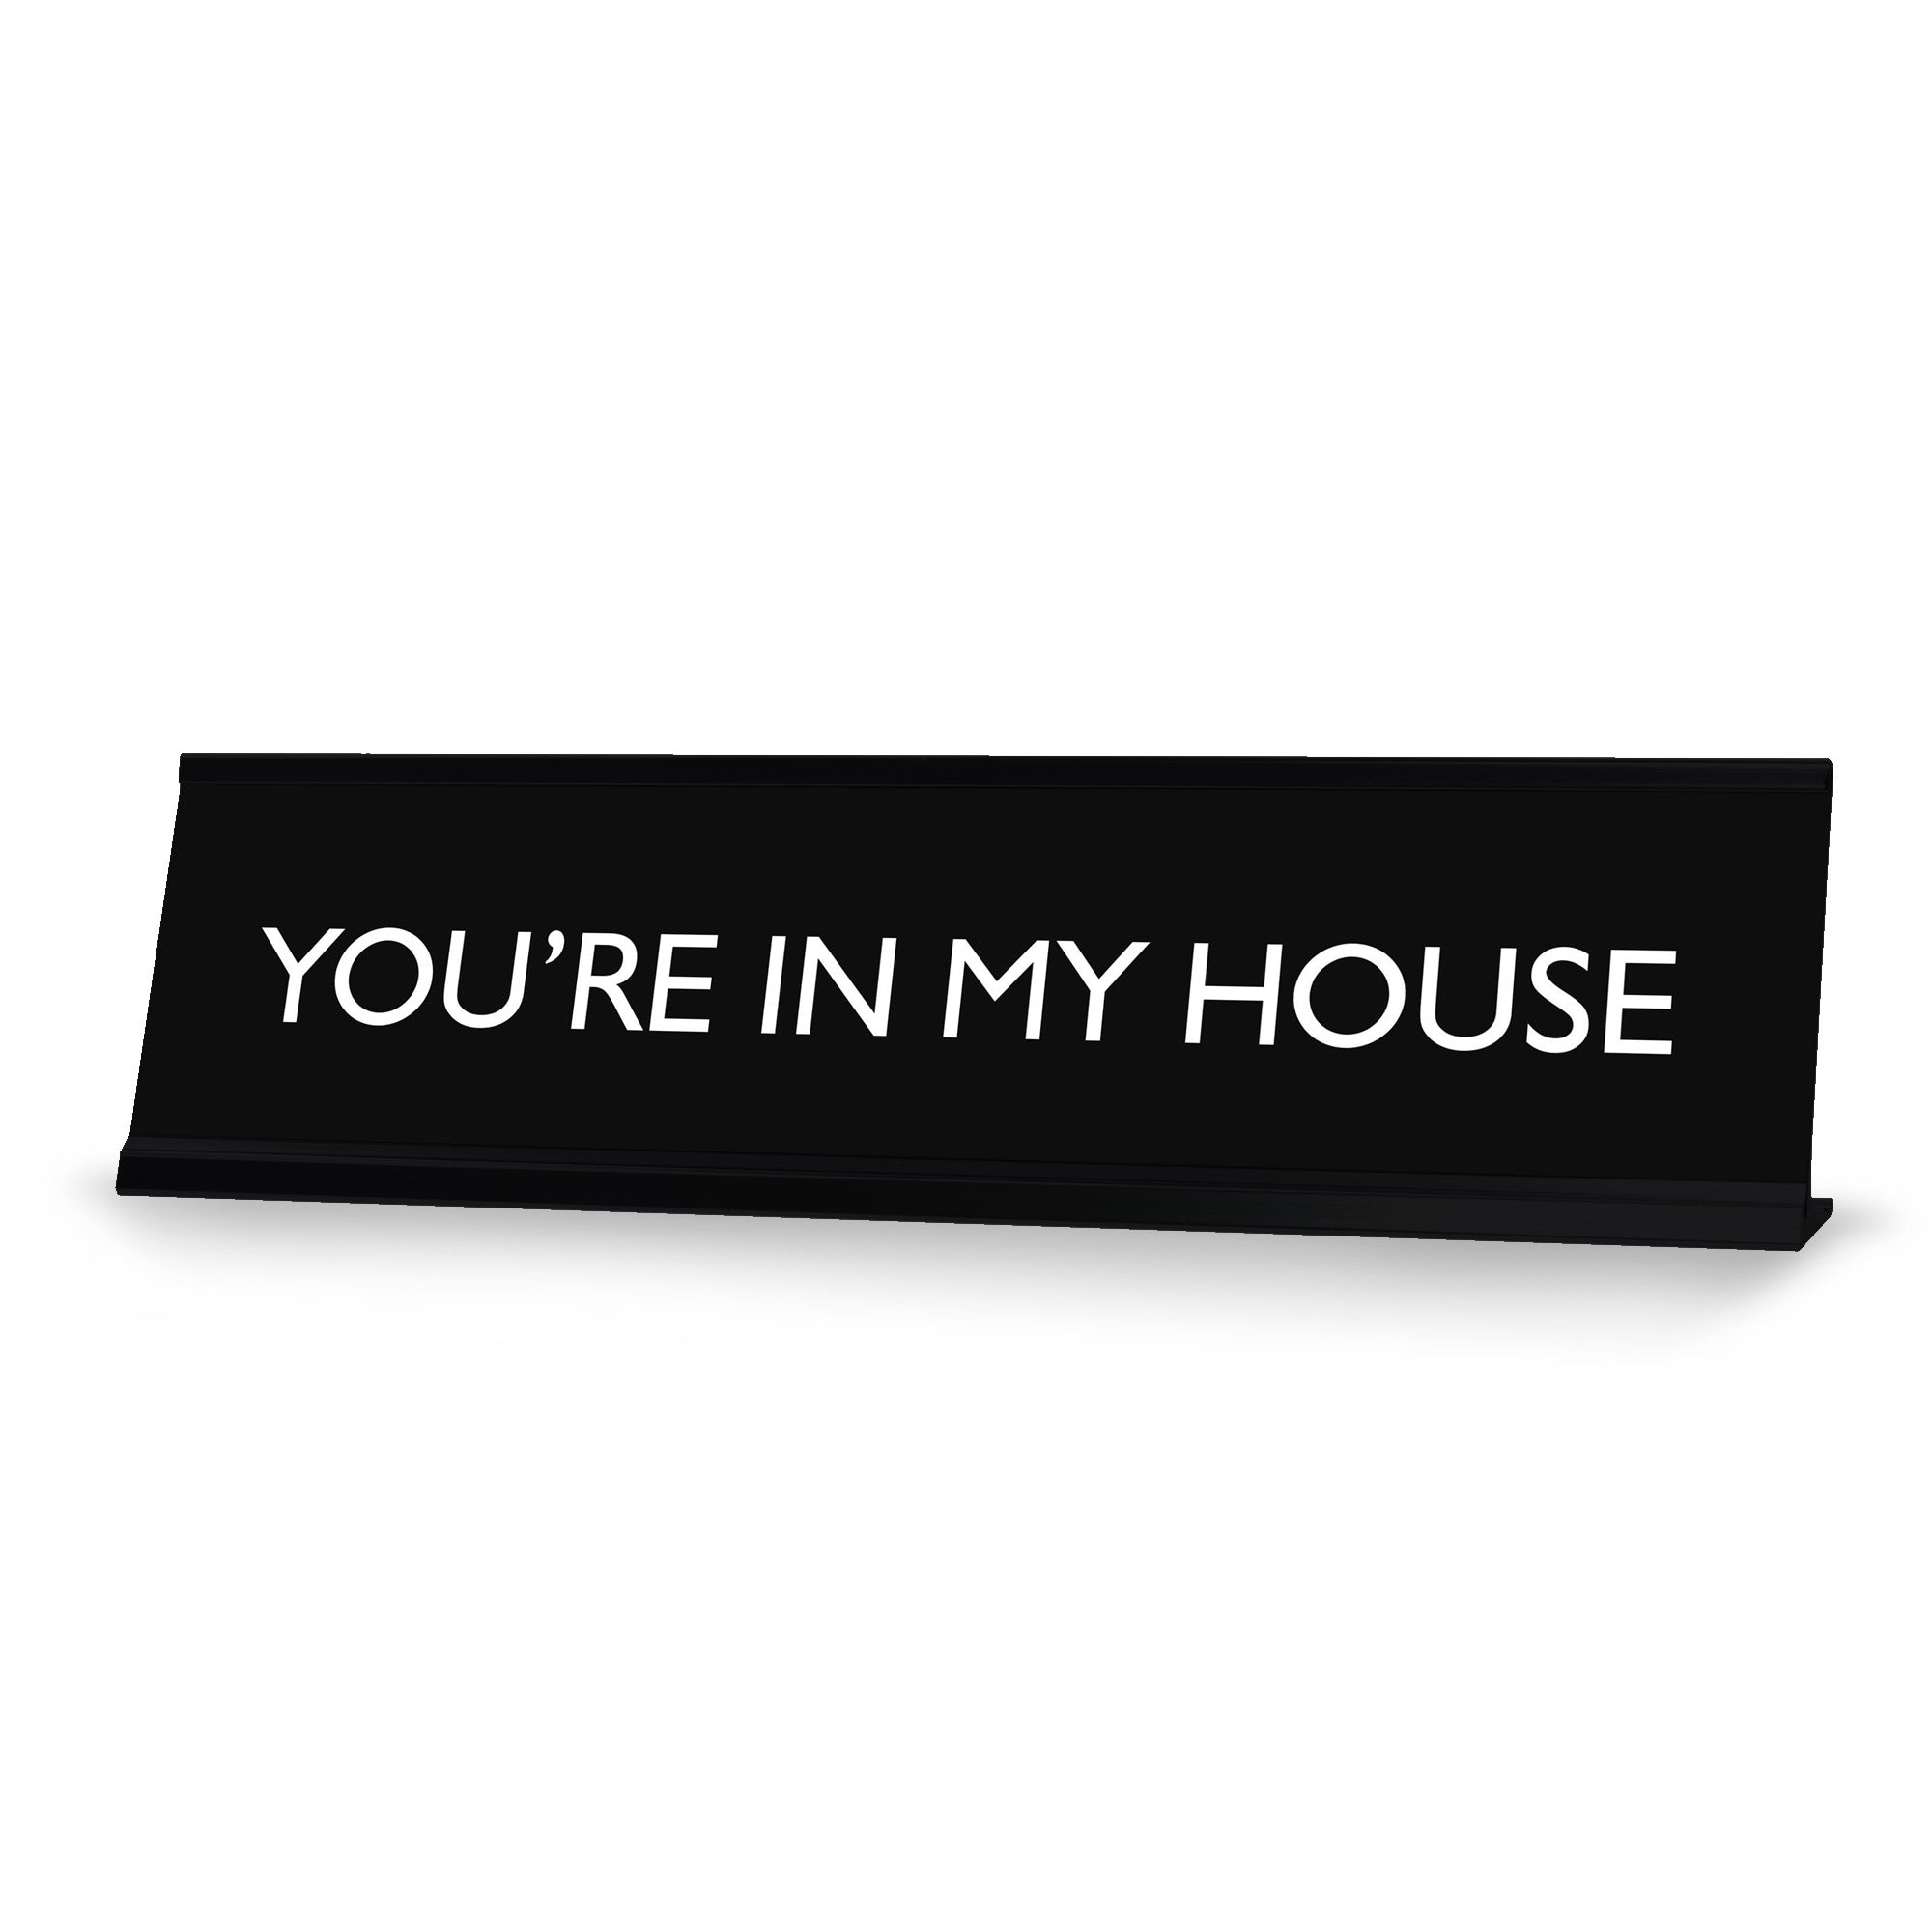 YOU'RE IN MY HOUSE Novelty Desk Sign